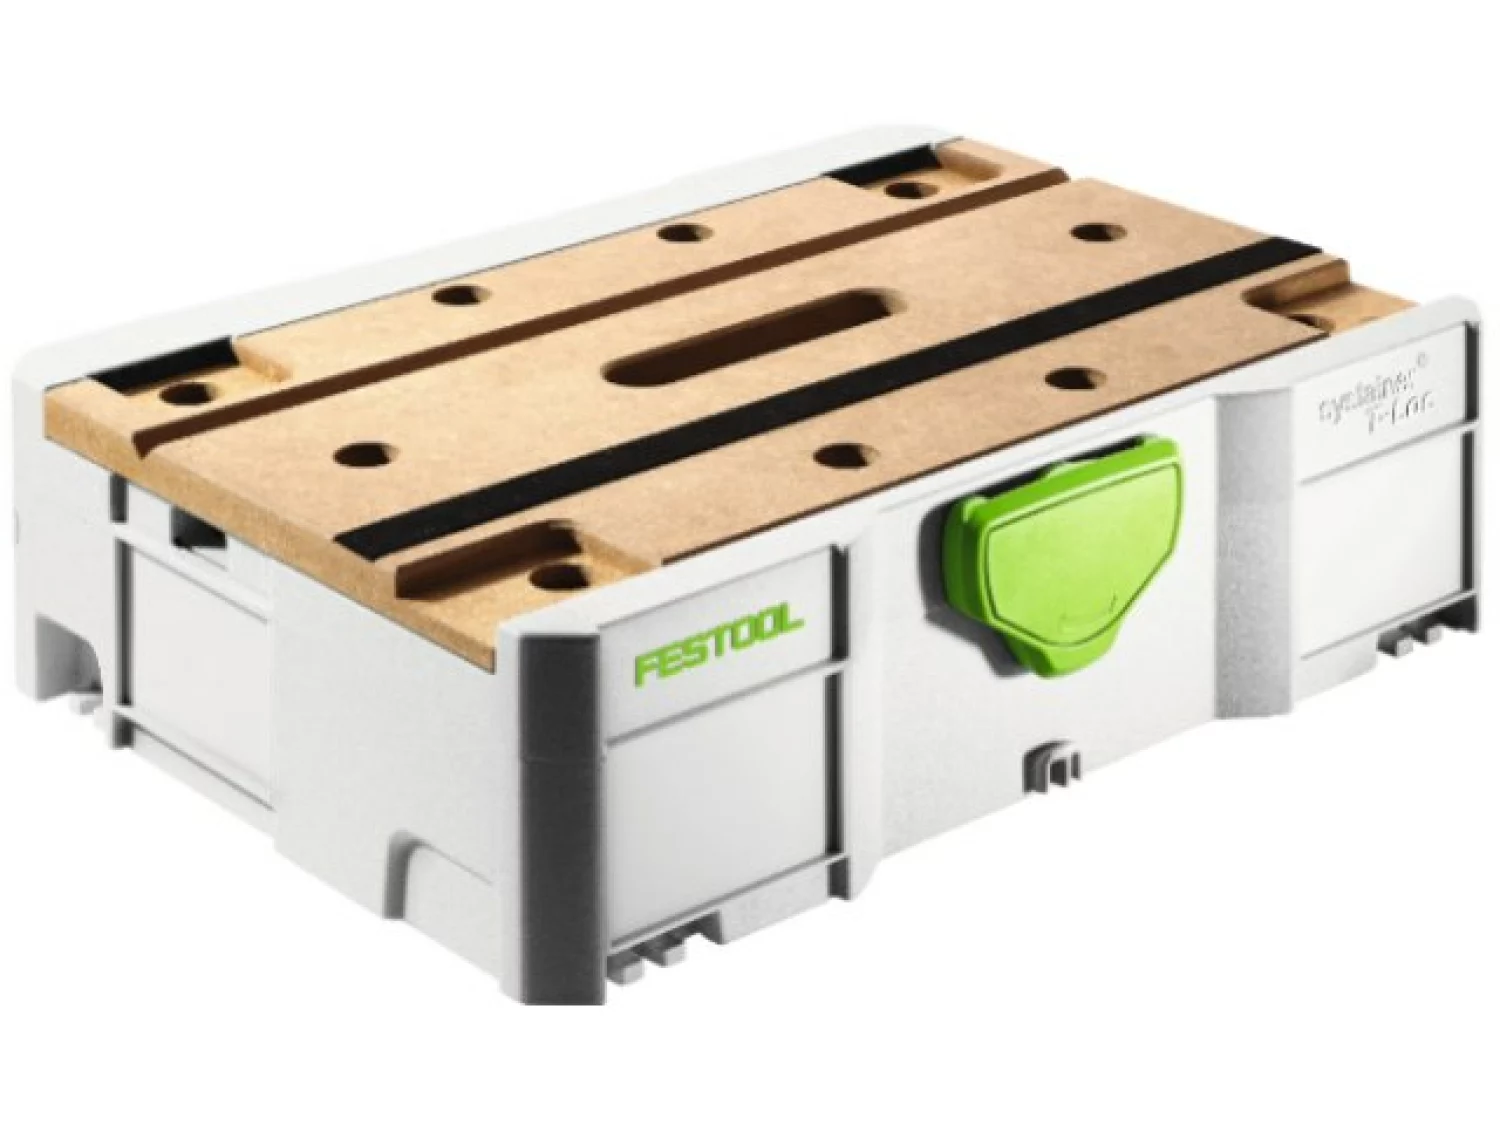 Festool 500076 SYS-MFT Systainer - 396 x 296 x 105mm